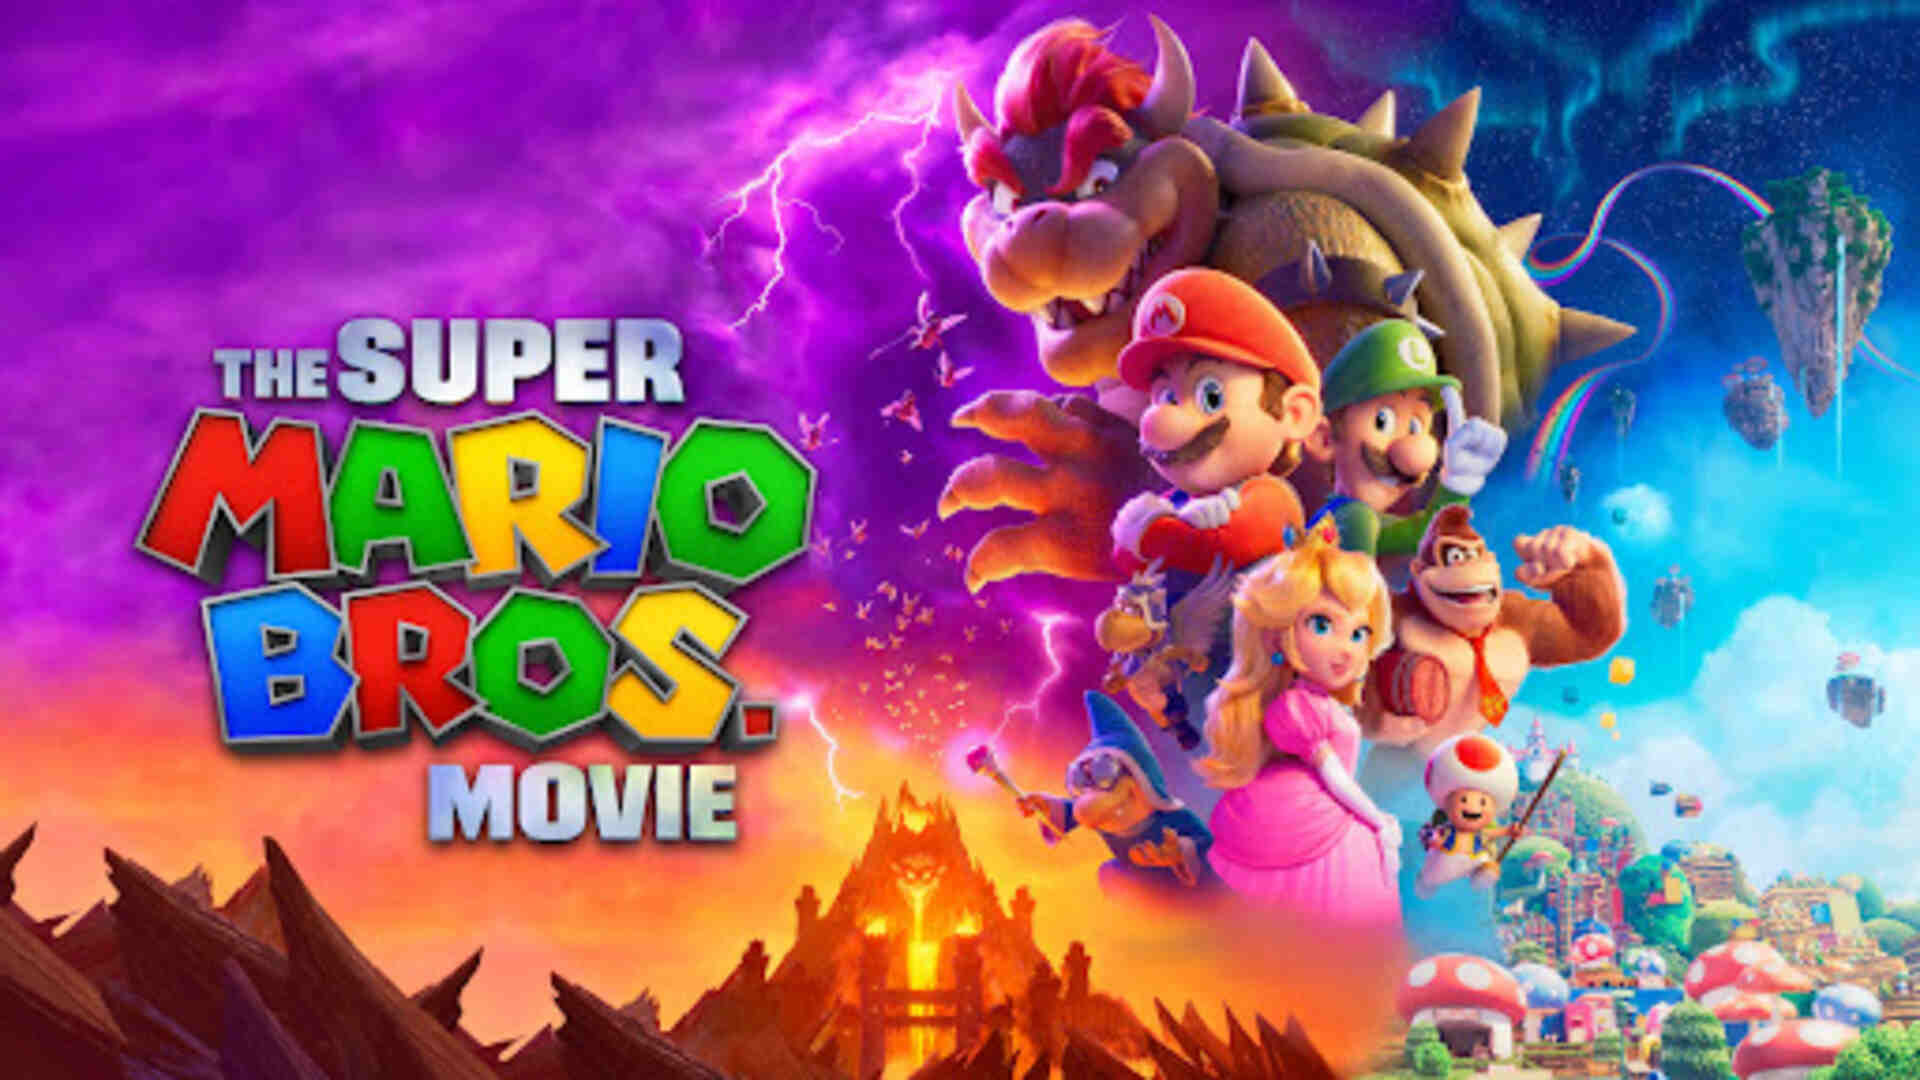 The Super Mario Bros. Movie Is Streaming on Peacock